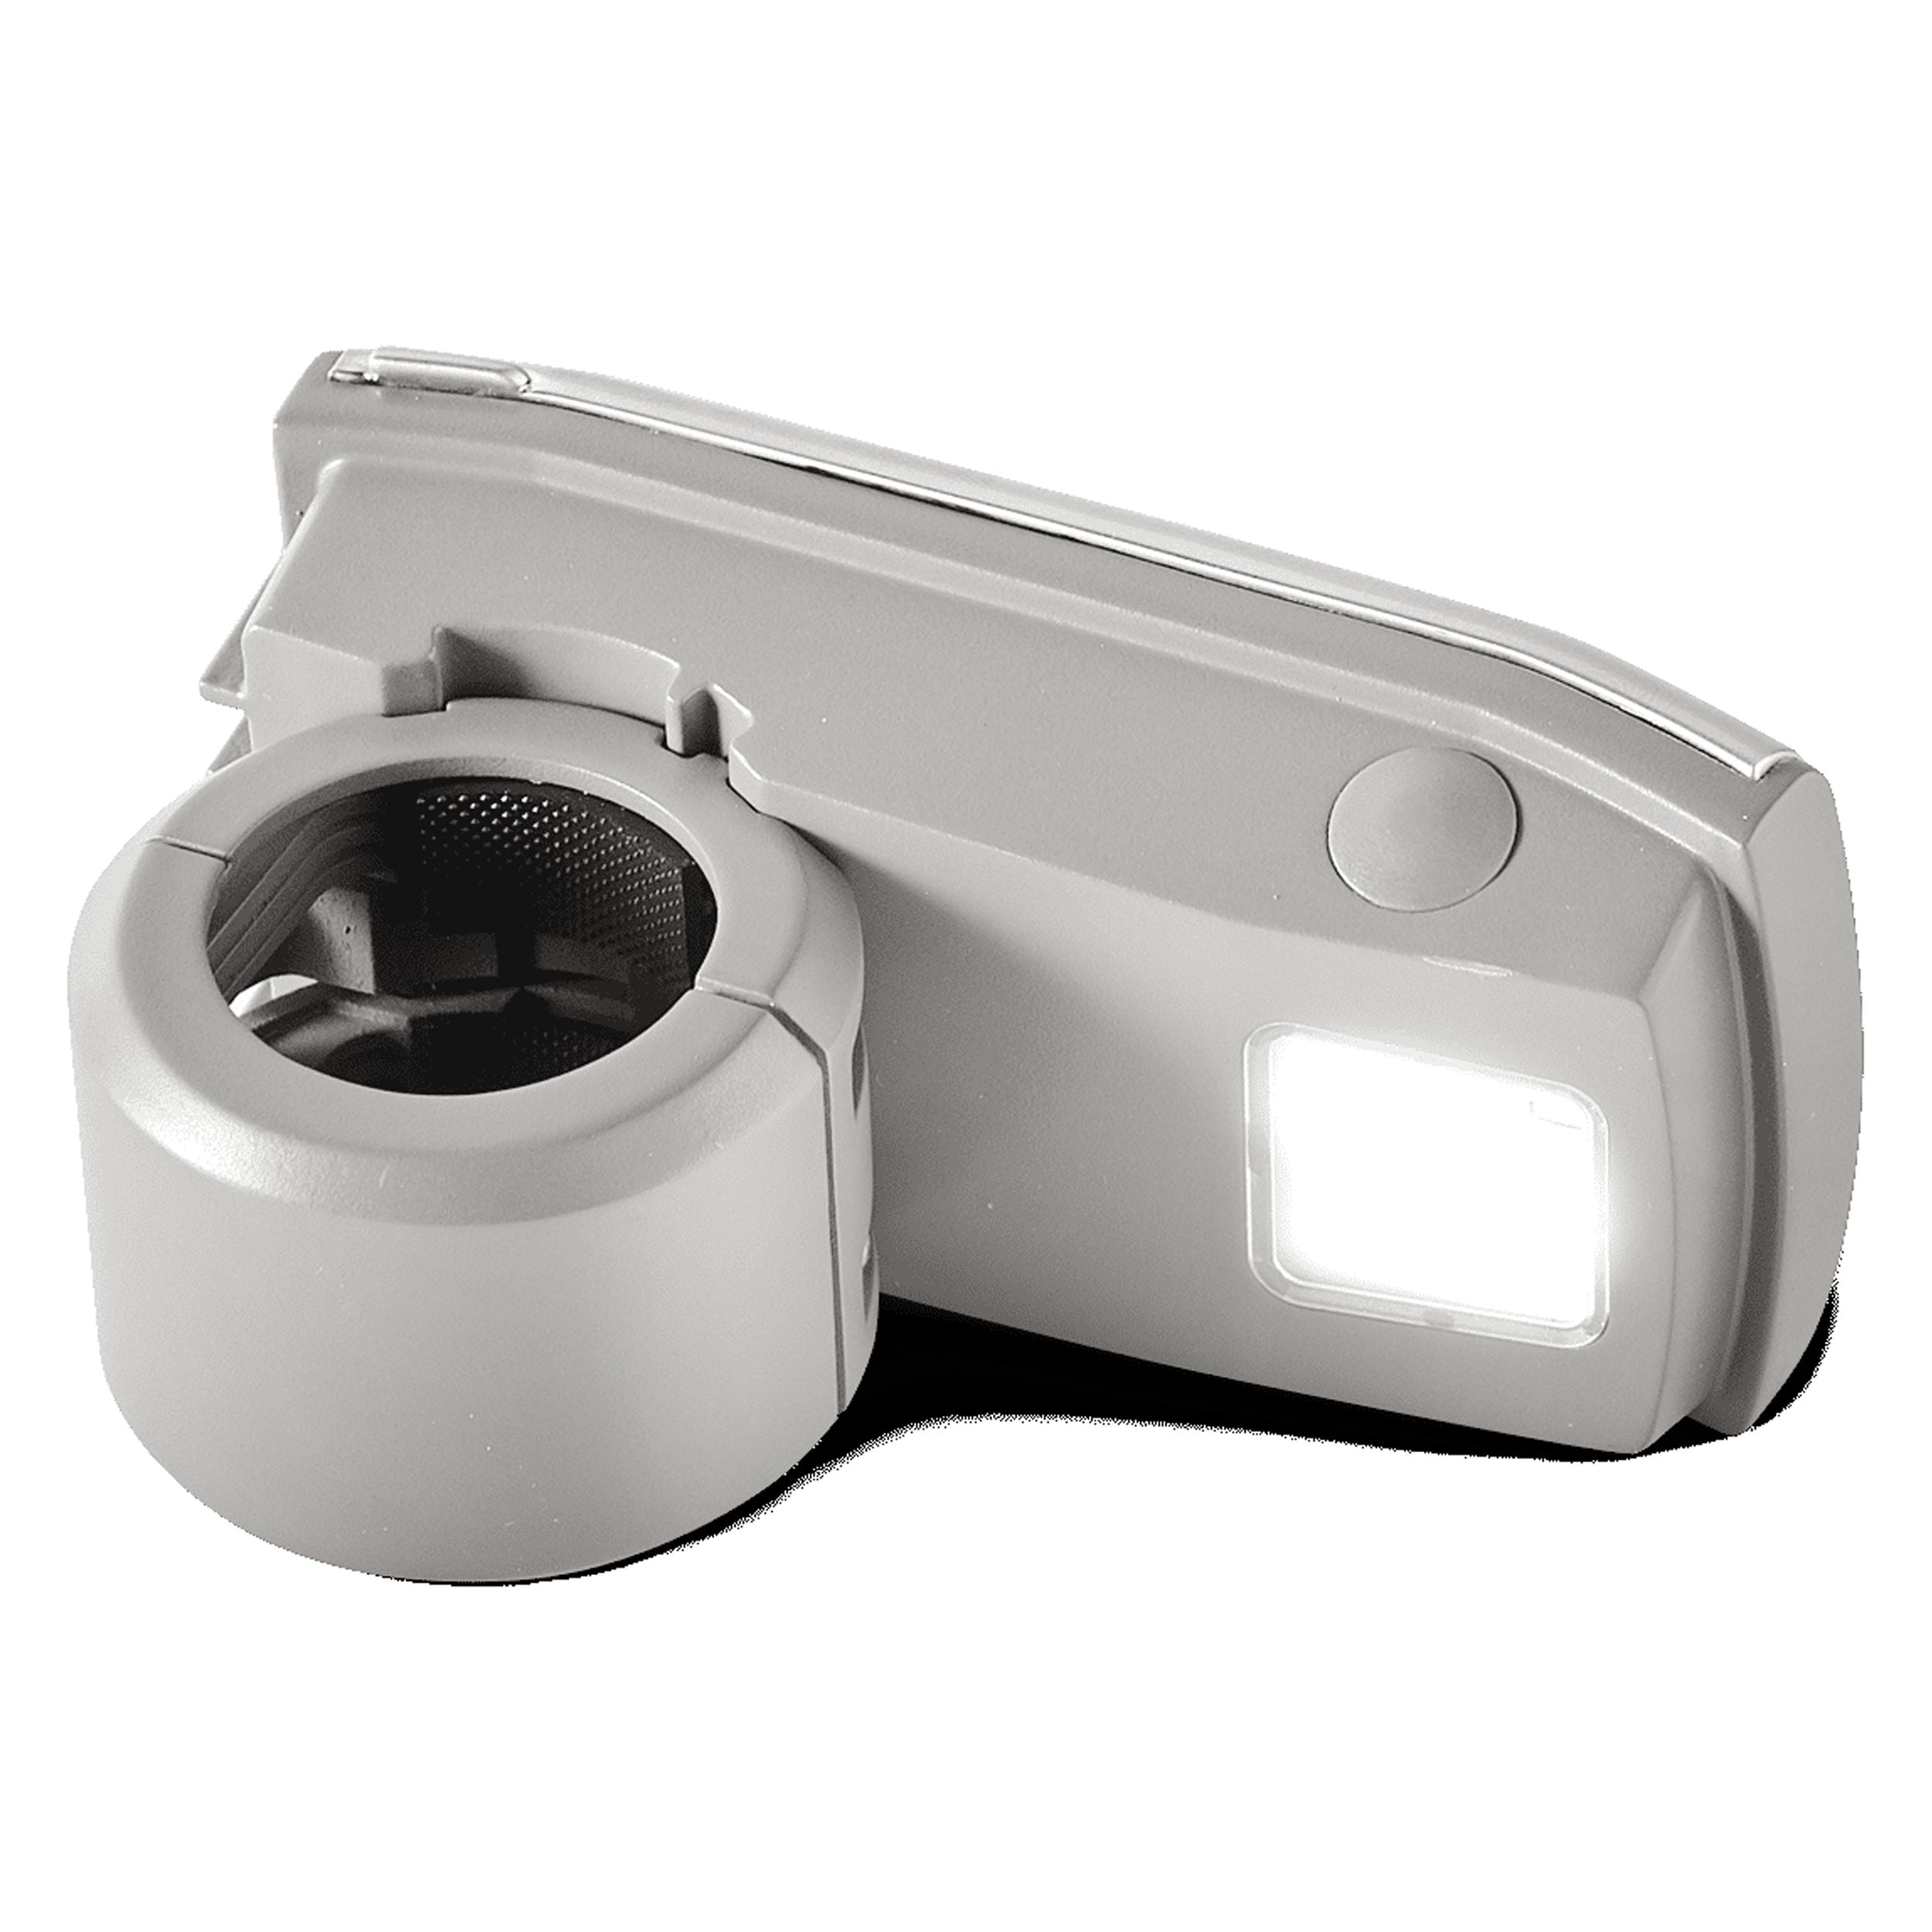 Grill 'n Go Light - Spirit & select Genesis/Summit, Merchandise and  Outdoor Lifestyle, Grill Lights